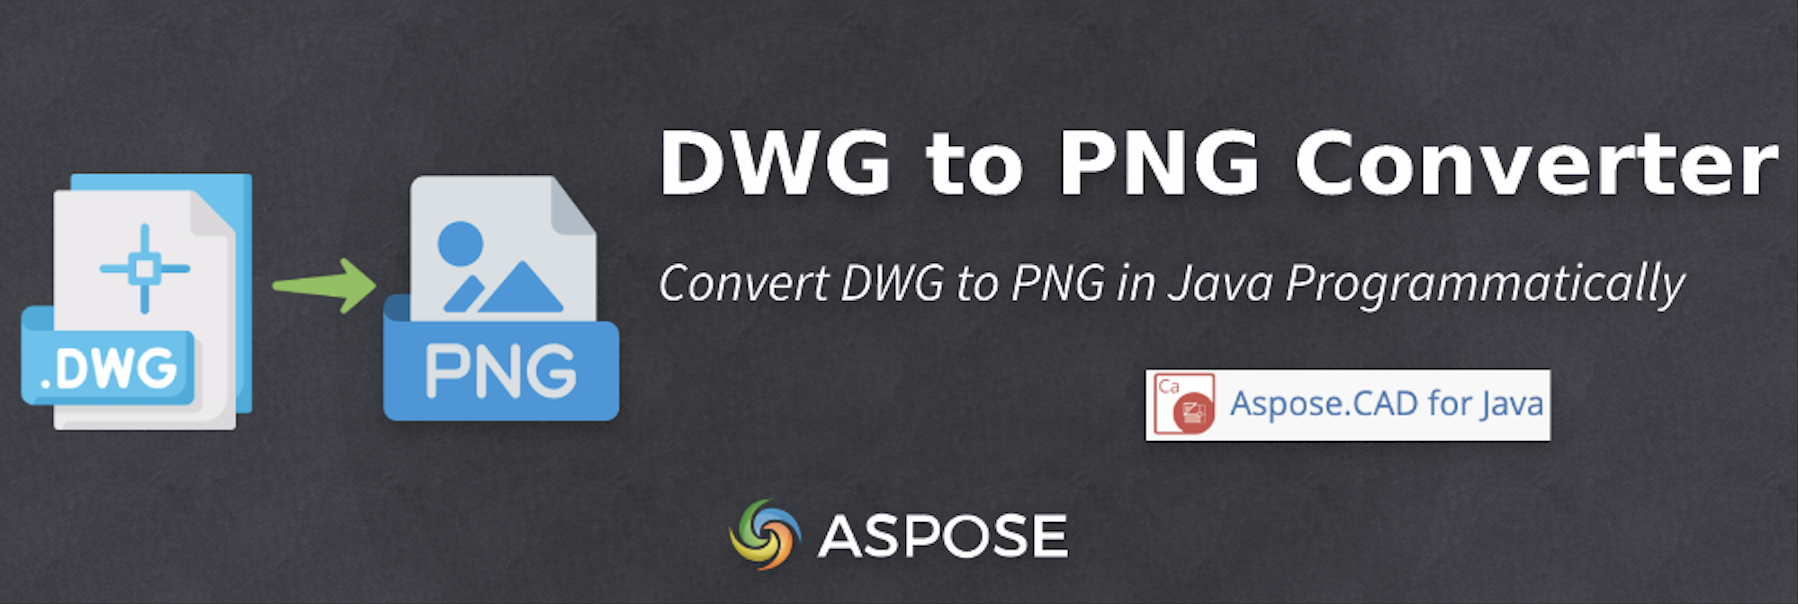 Convert DWG to PNG in Java - DWG to PNG Converter